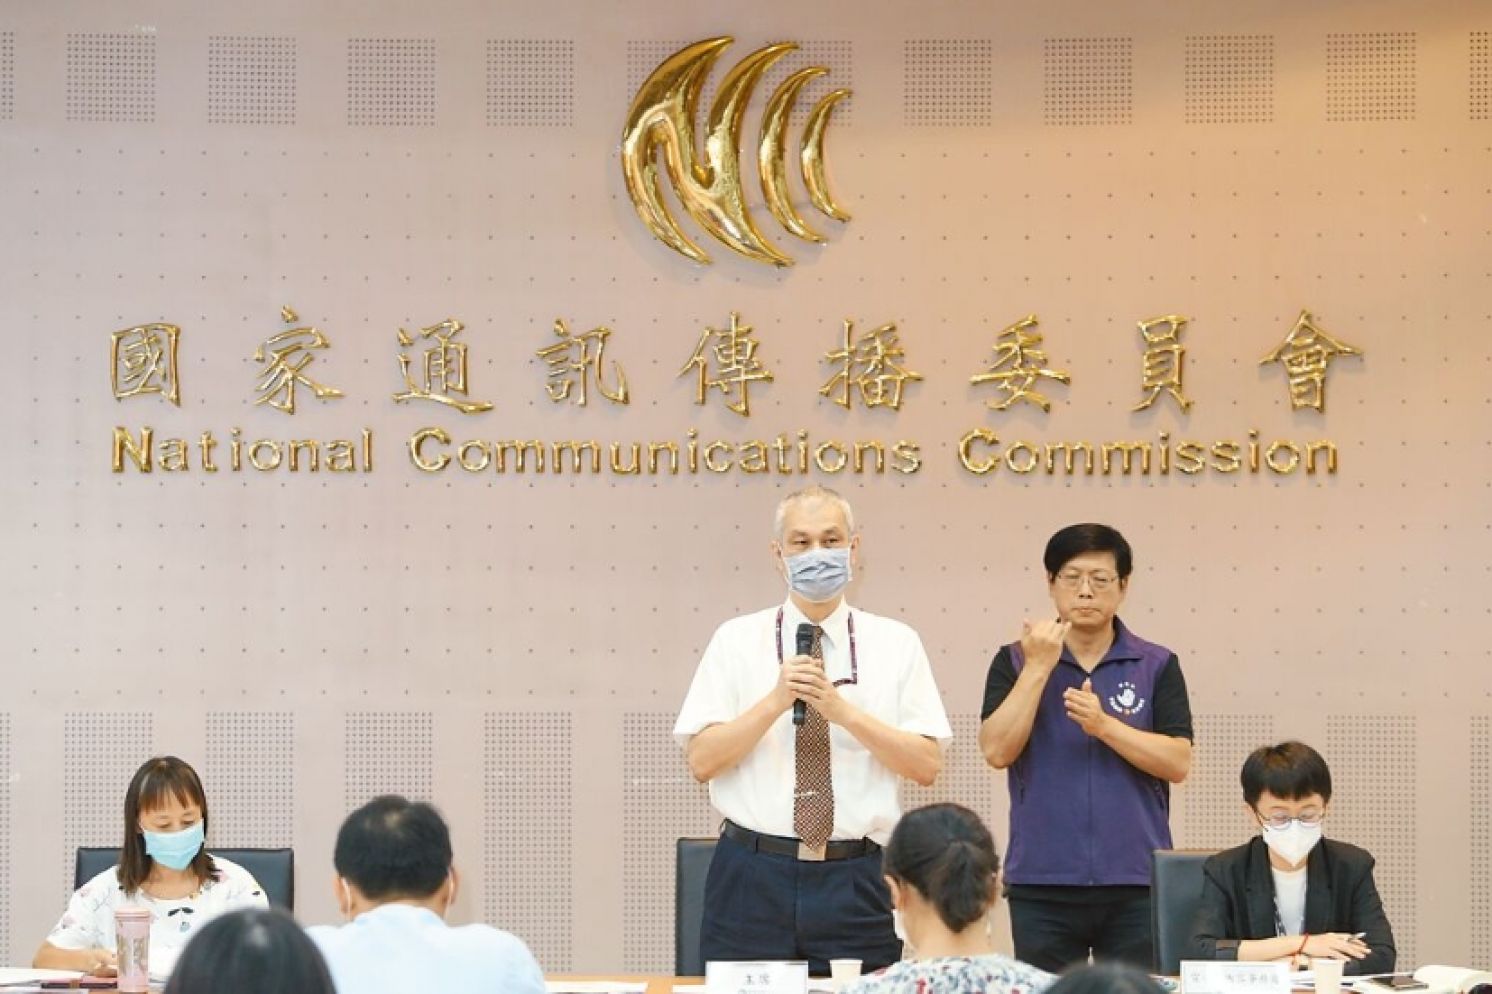 Premier Su Calls Stops for NCC's Digital Intermediary Services Act